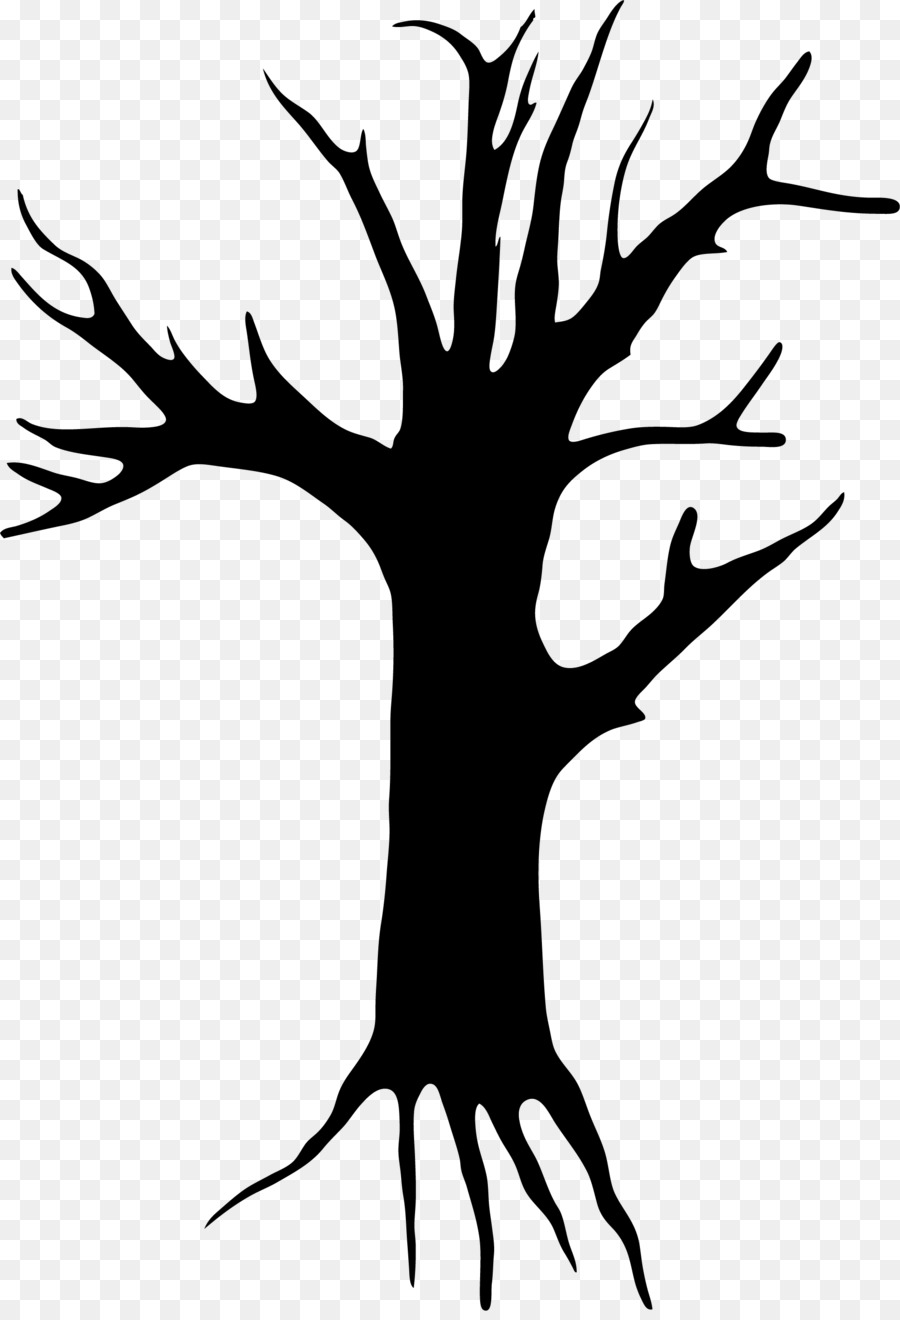 Tree Clip art - scary png download - 900*1311 - Free Transparent Tree png Download.